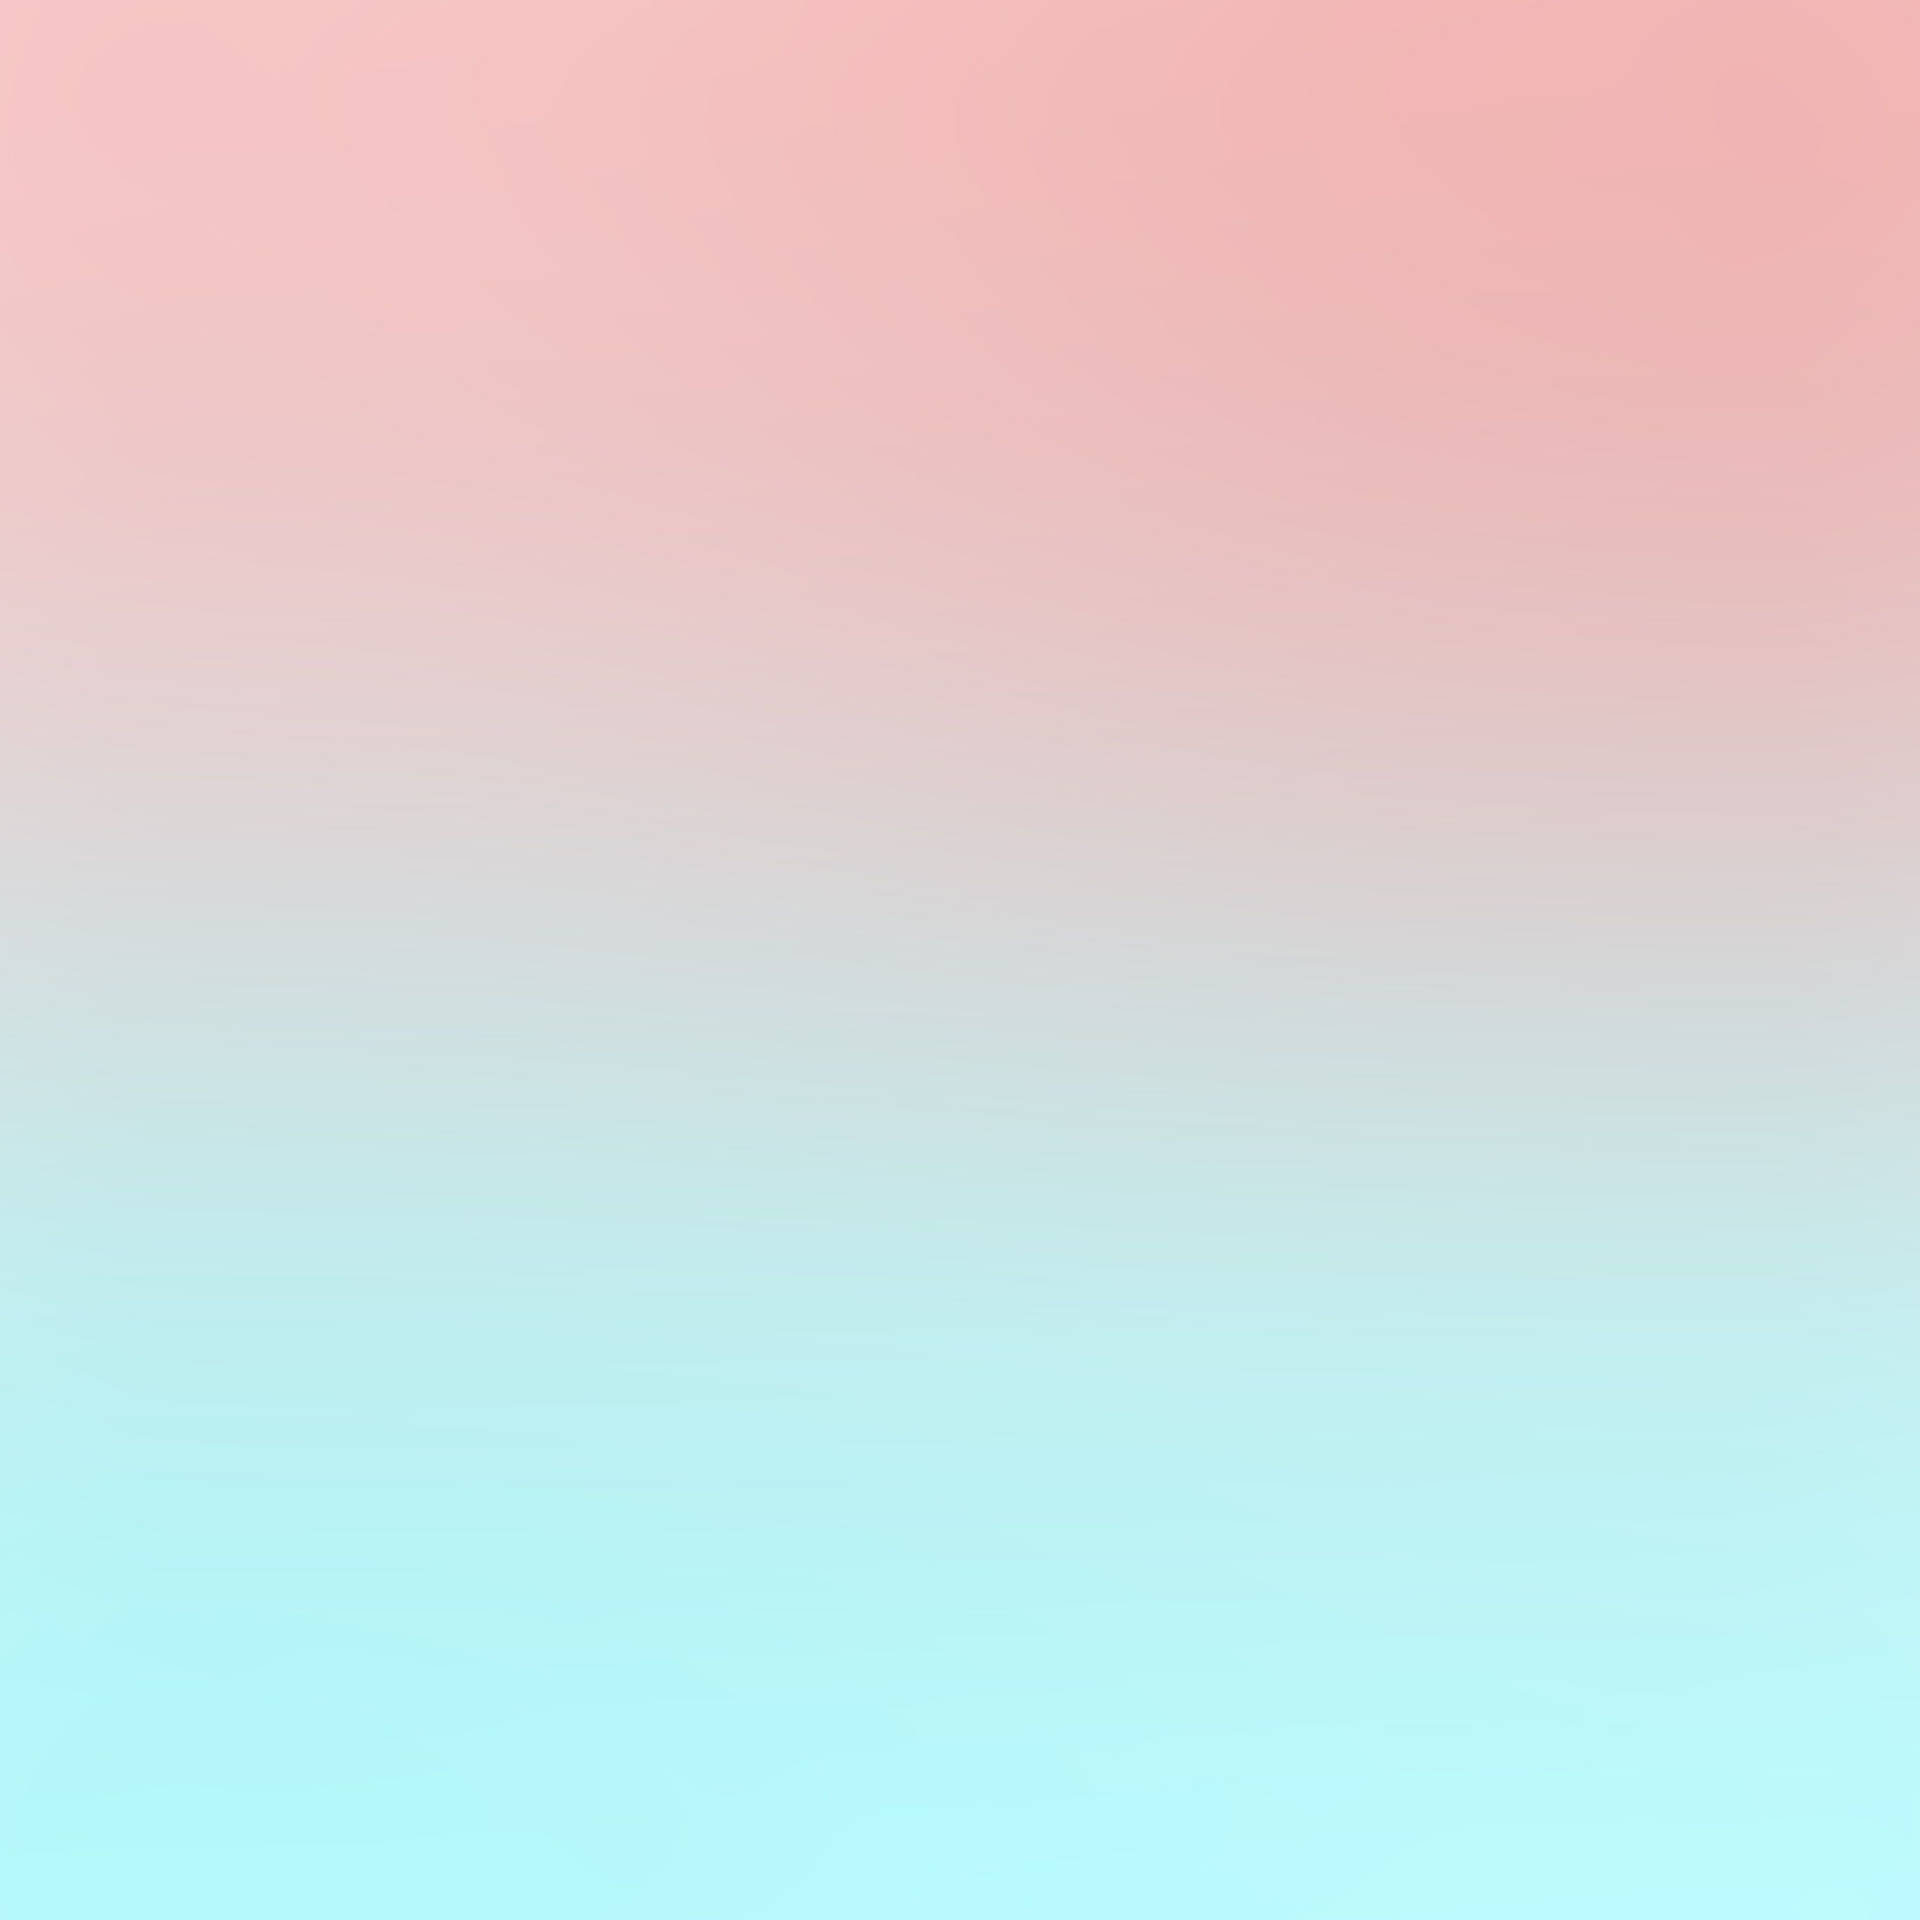 Pastel Blue And Pink Gradient Picture